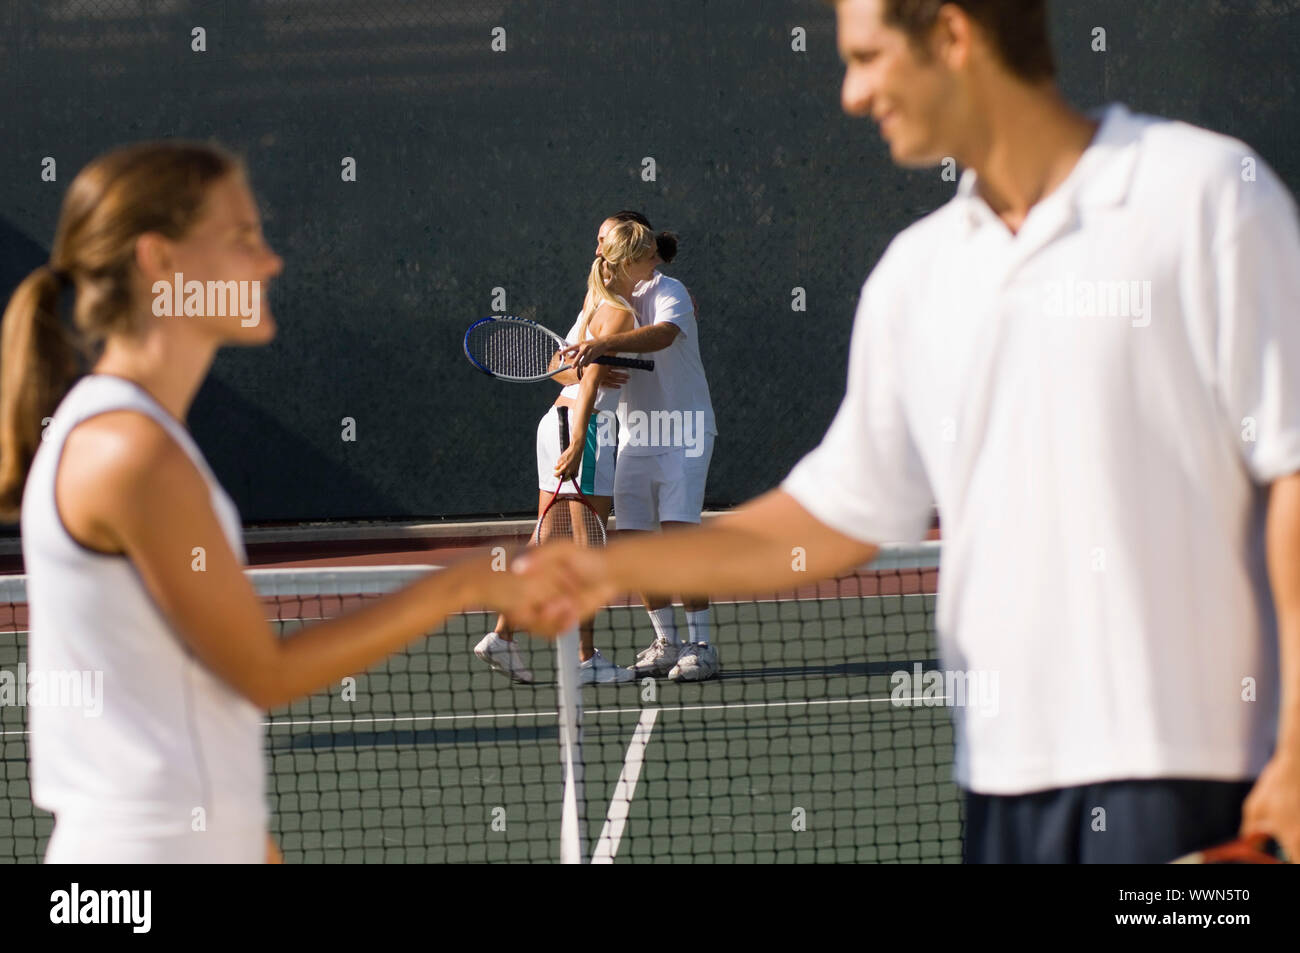 Tennis Players Shaking Hands at Net Stock Photo